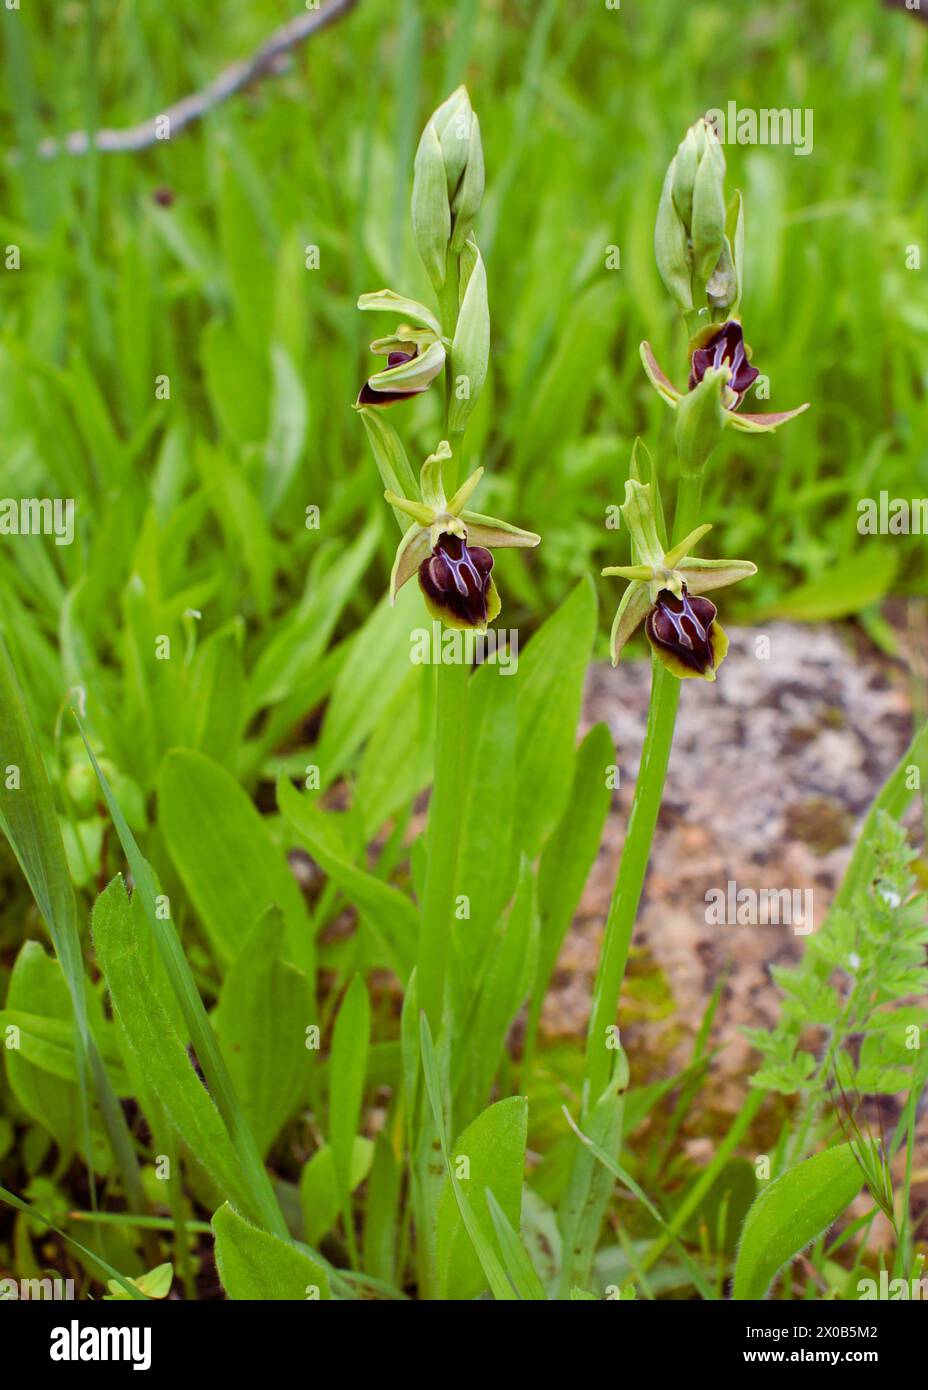 Two flowering plants of the Alasian bee orchid (Ophrys alasiatica), in natural habitat, Cyprus Stock Photo